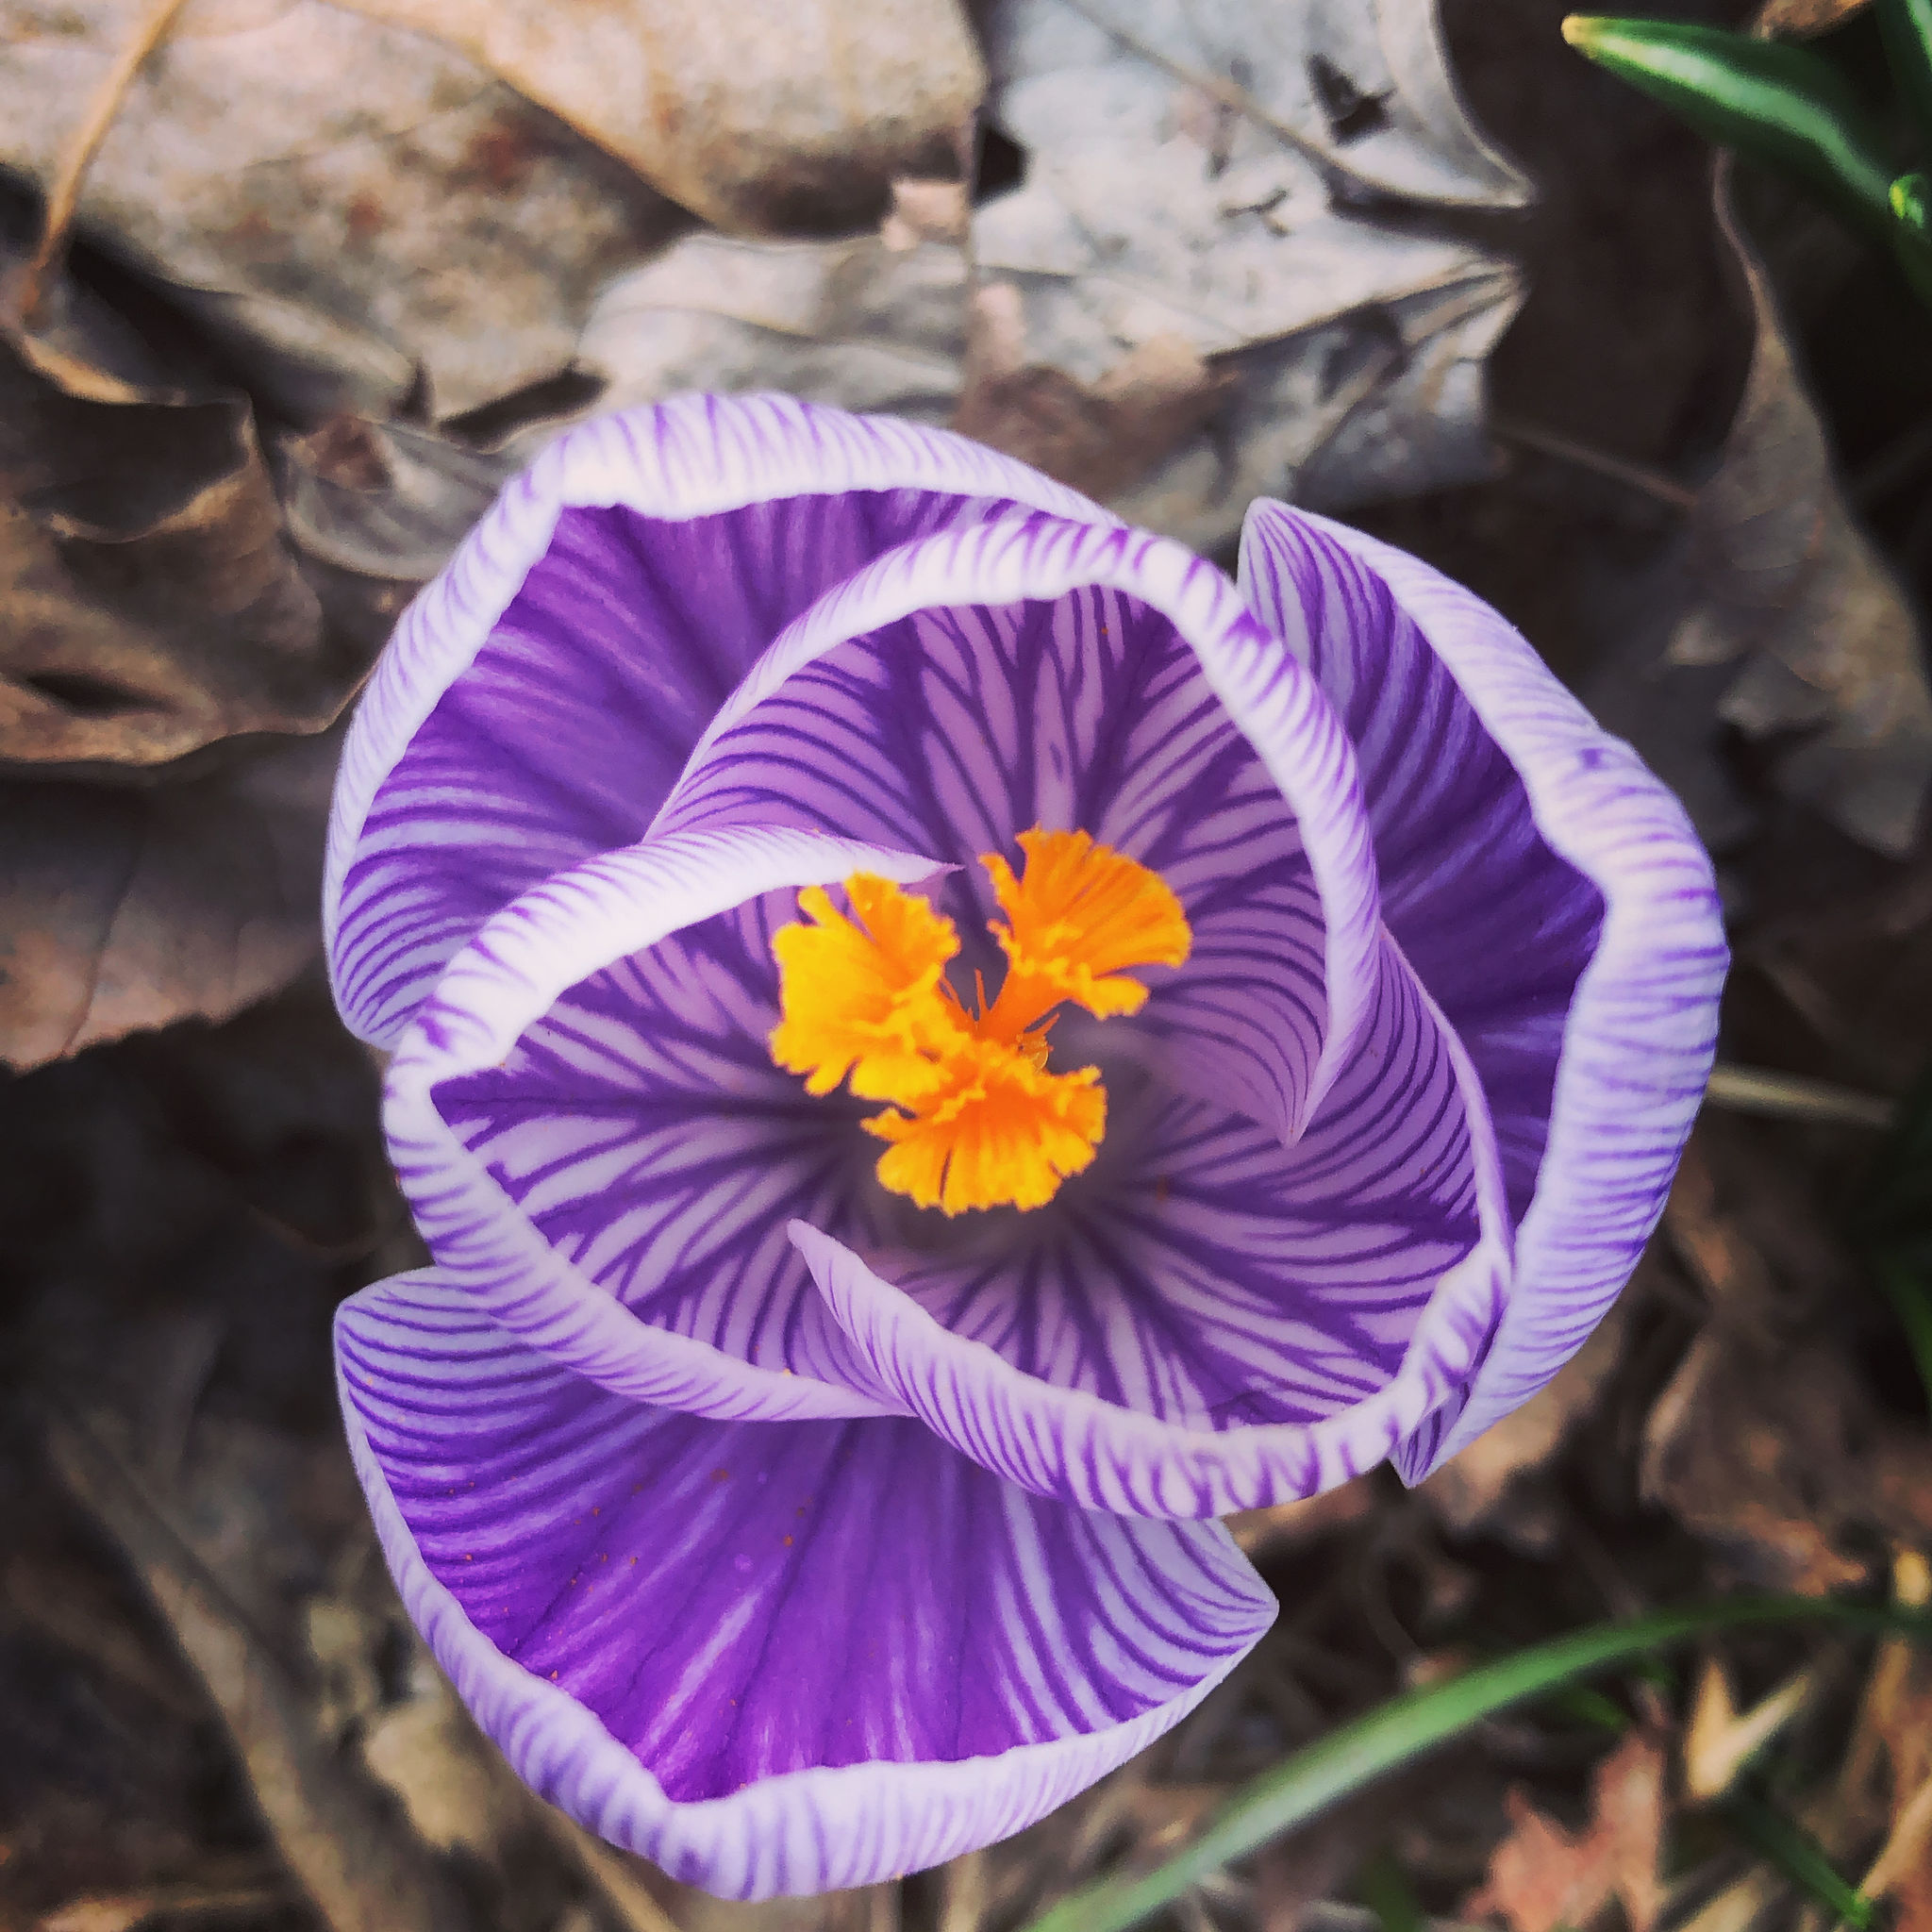 Crocus are one of the first flowers to bloom each spring. Crocus is a genus of flowering plants in the iris family comprising 90 species.